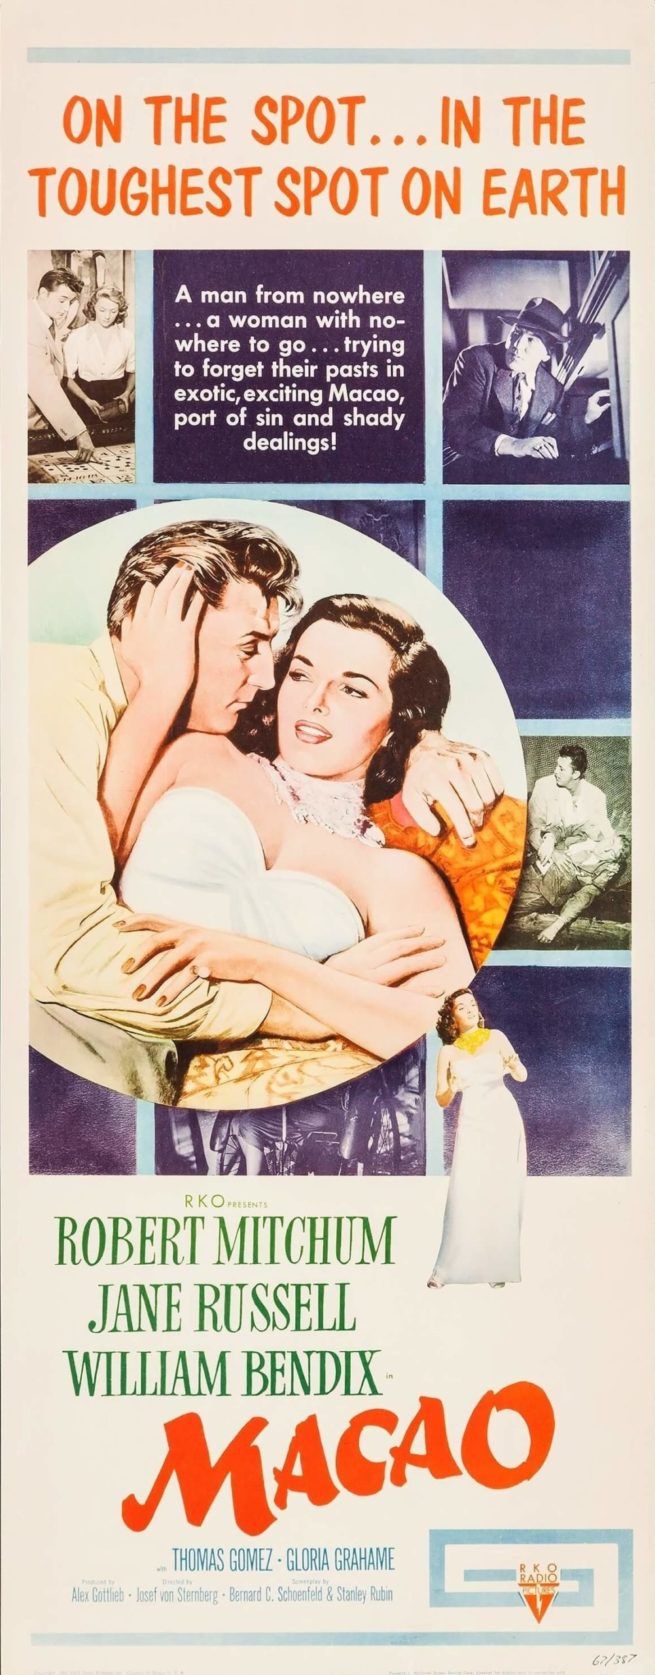 Original vintage movie poster for 1952 Macao with Jane Russell and Robert Mitchum